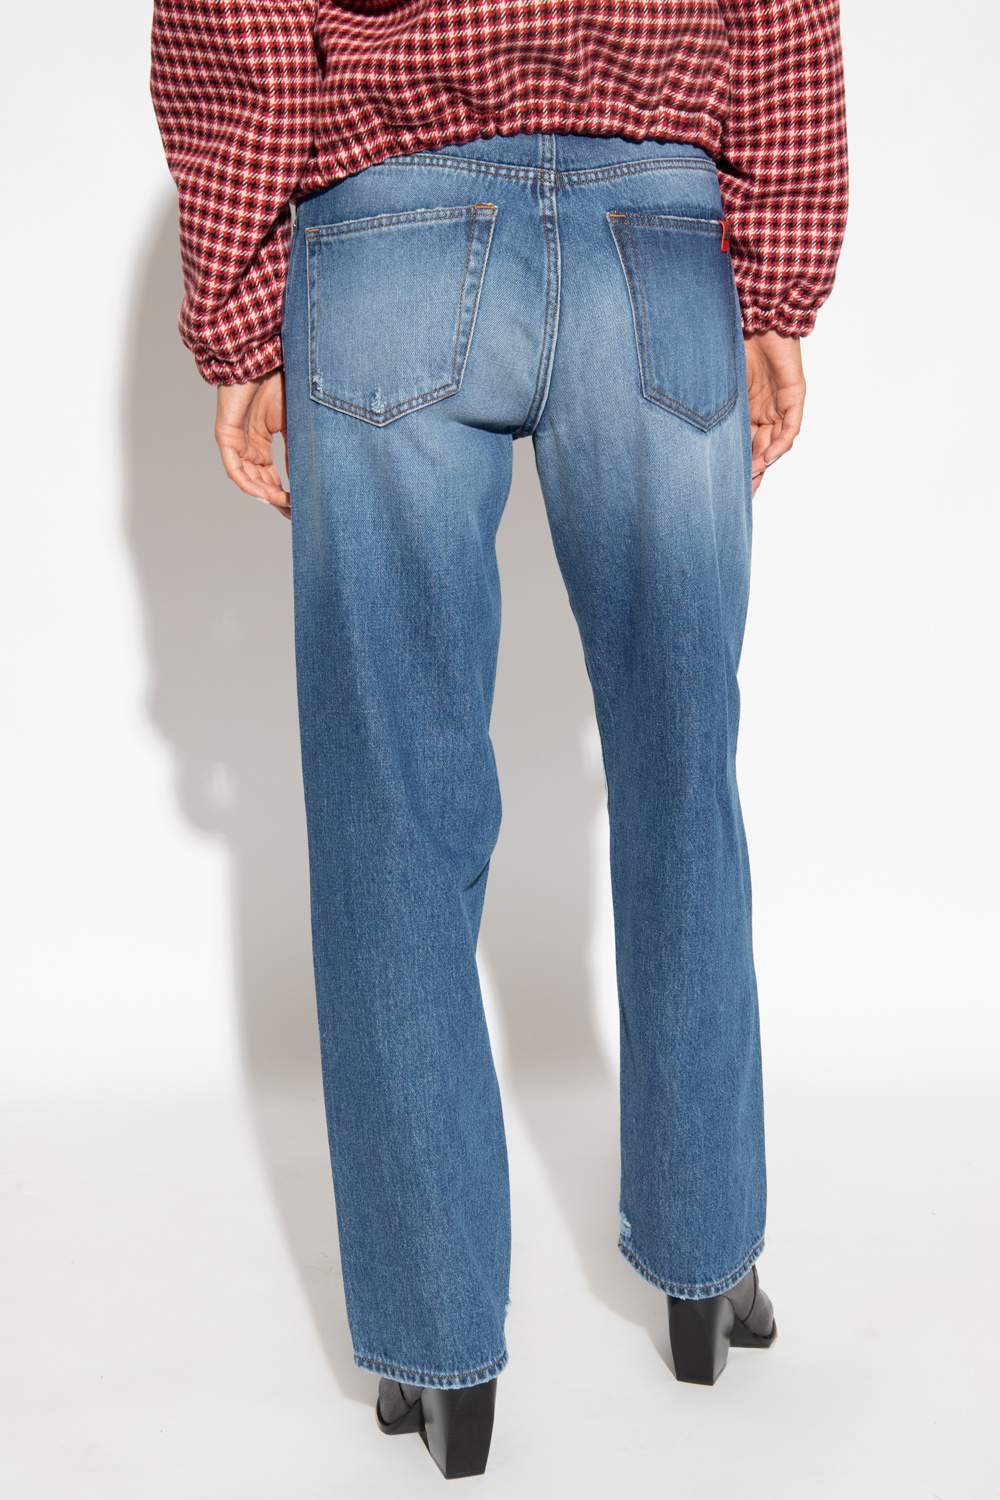 Love Moschino Distressed jeans